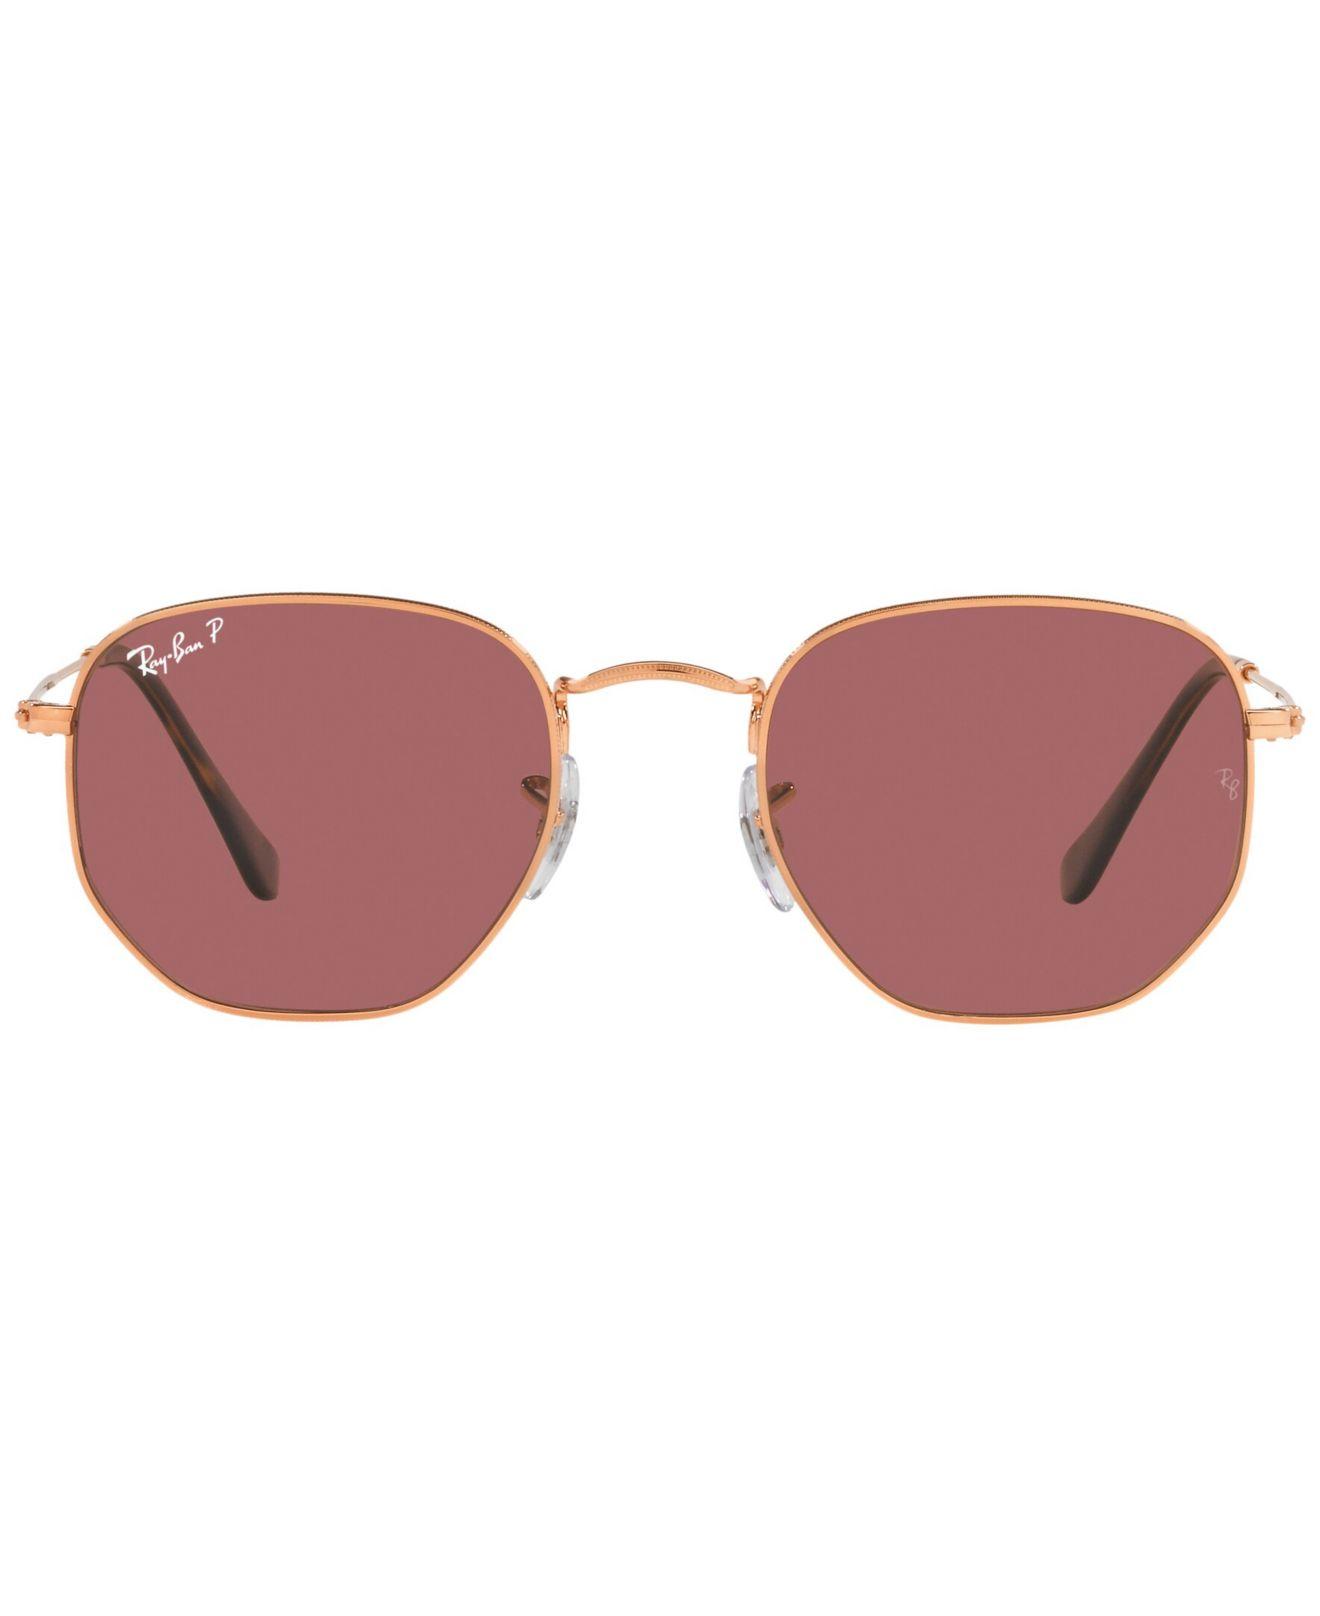 Ray-Ban Unisex Polarized Sunglasses, Rb3548n 51 in Pink | Lyst